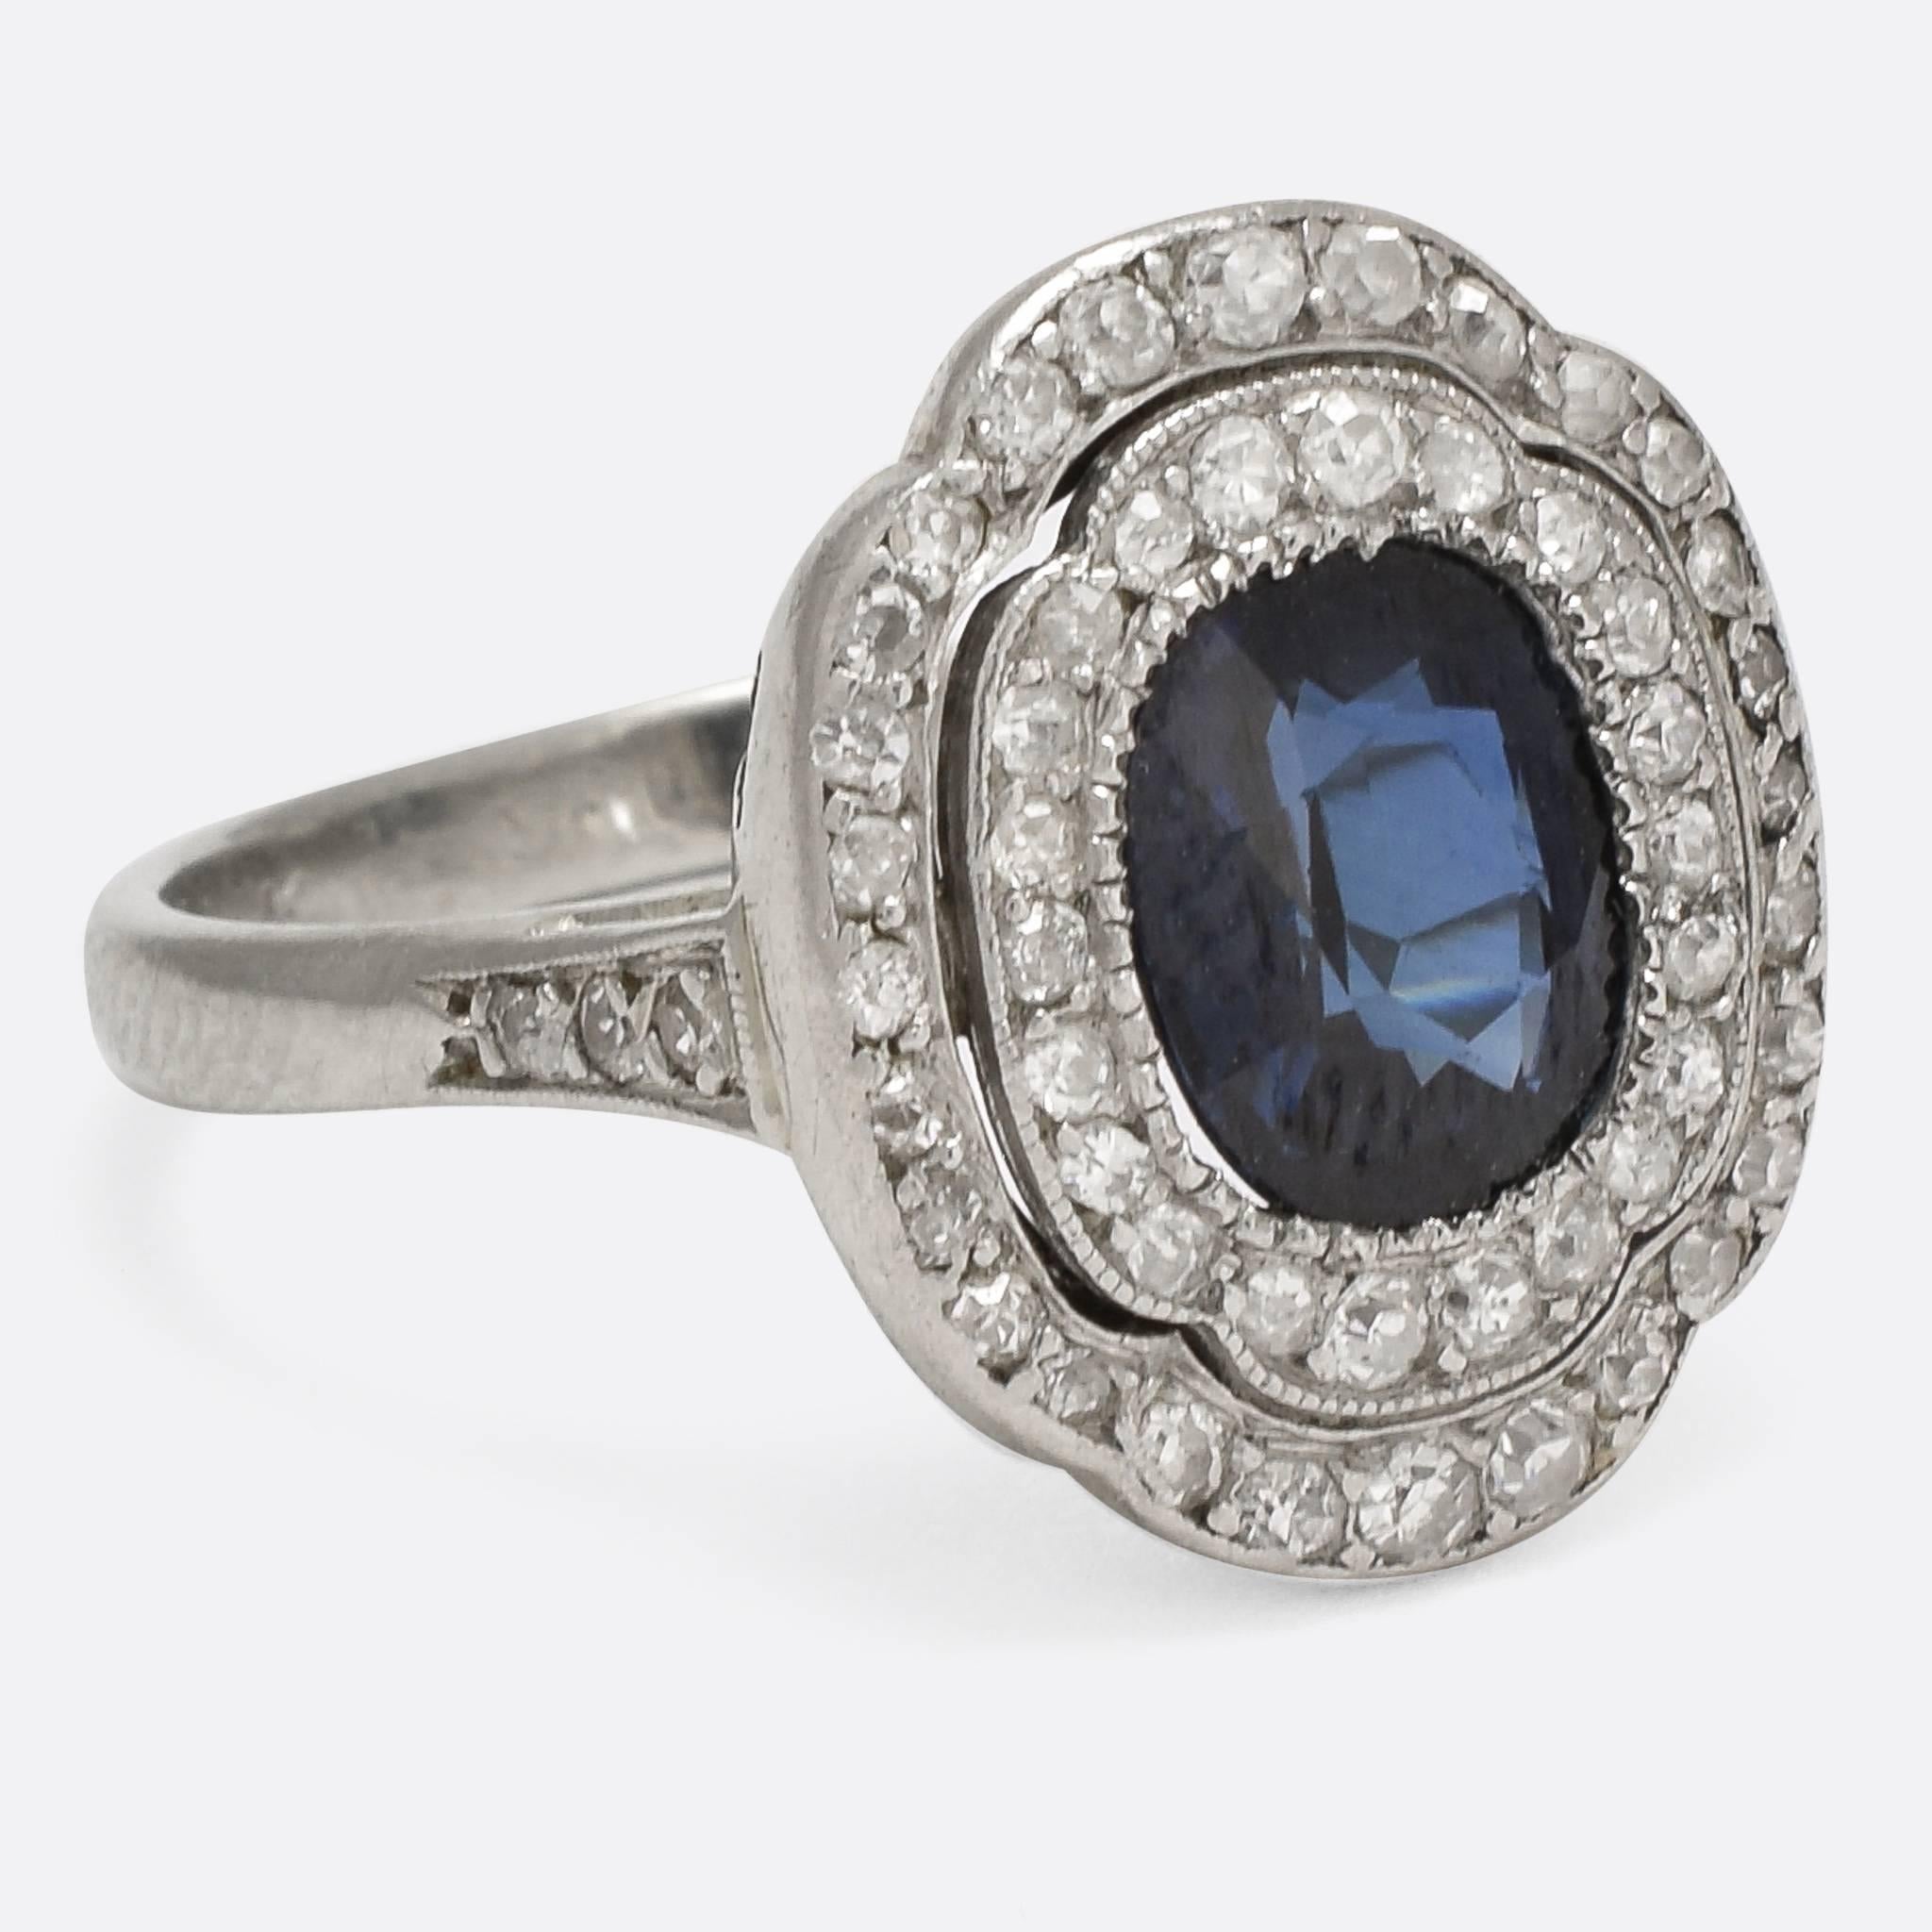 A stunning 1920s cocktail ring, set with a natural blue sapphire and a double halo of diamonds. The platinum settings are finely worked, with millegrain detail and diamond-set shoulders; while the back of the head features scrolled openwork. A